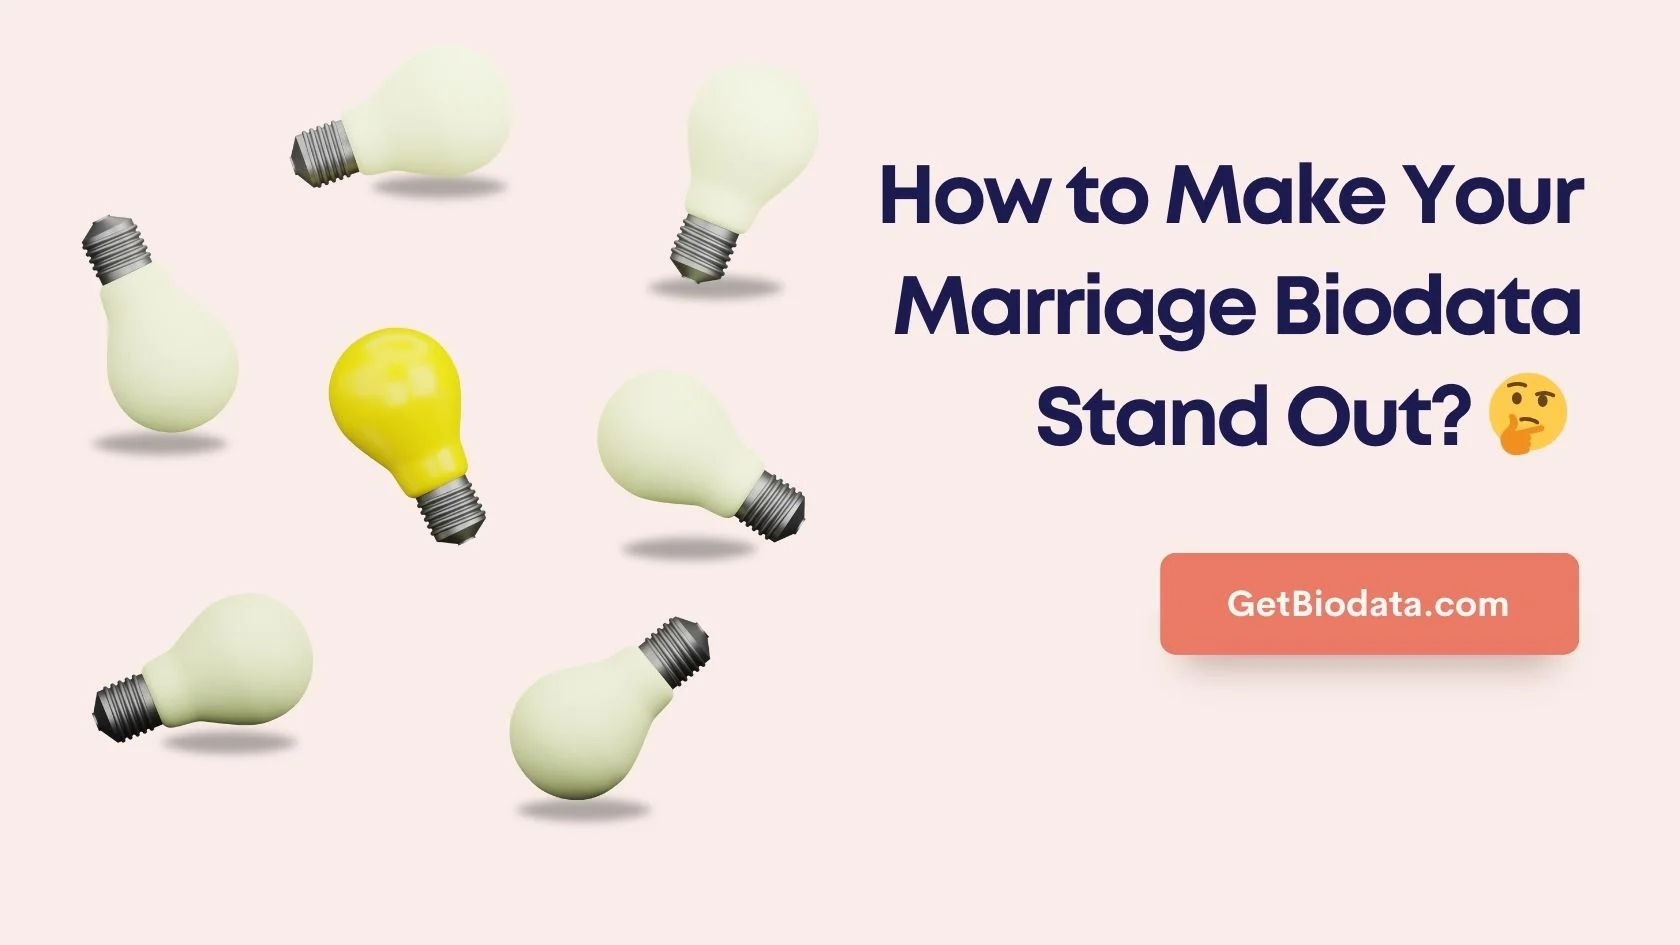 How to Make Your Marriage Biodata Stand Out?